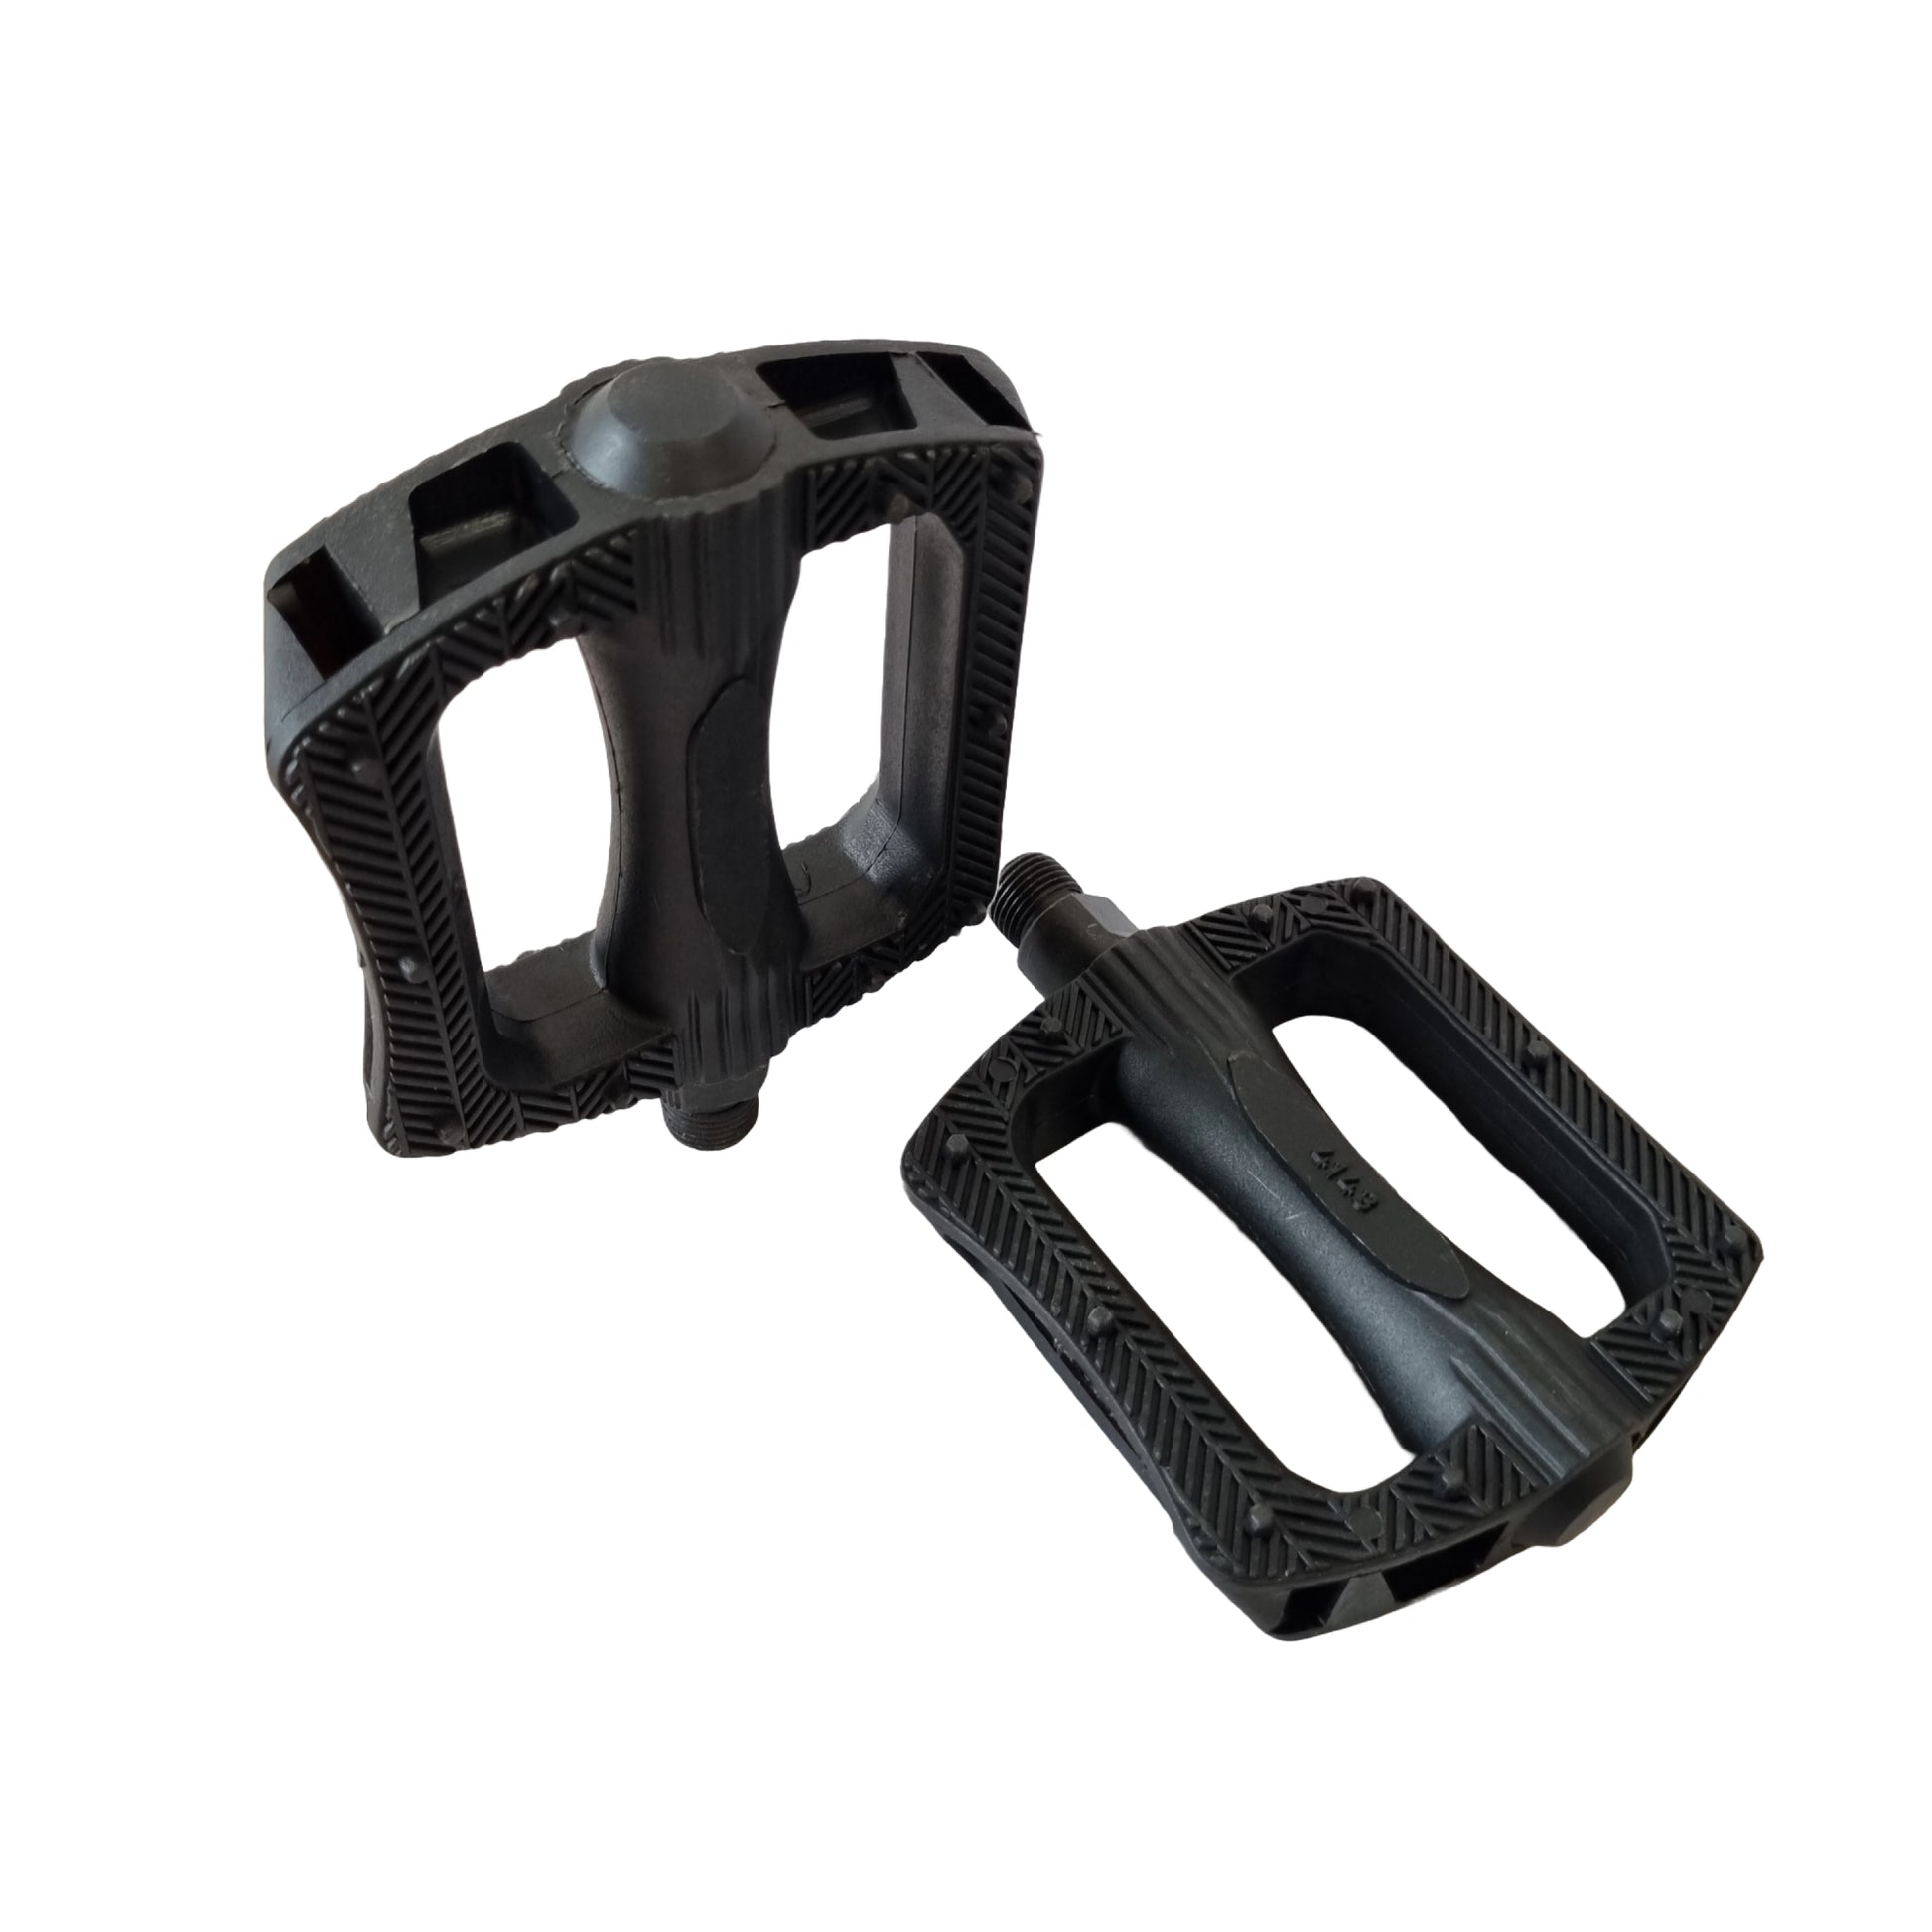 Buy online bicycle pedals for resin hybrid and mountain bike by omo bikes cycles